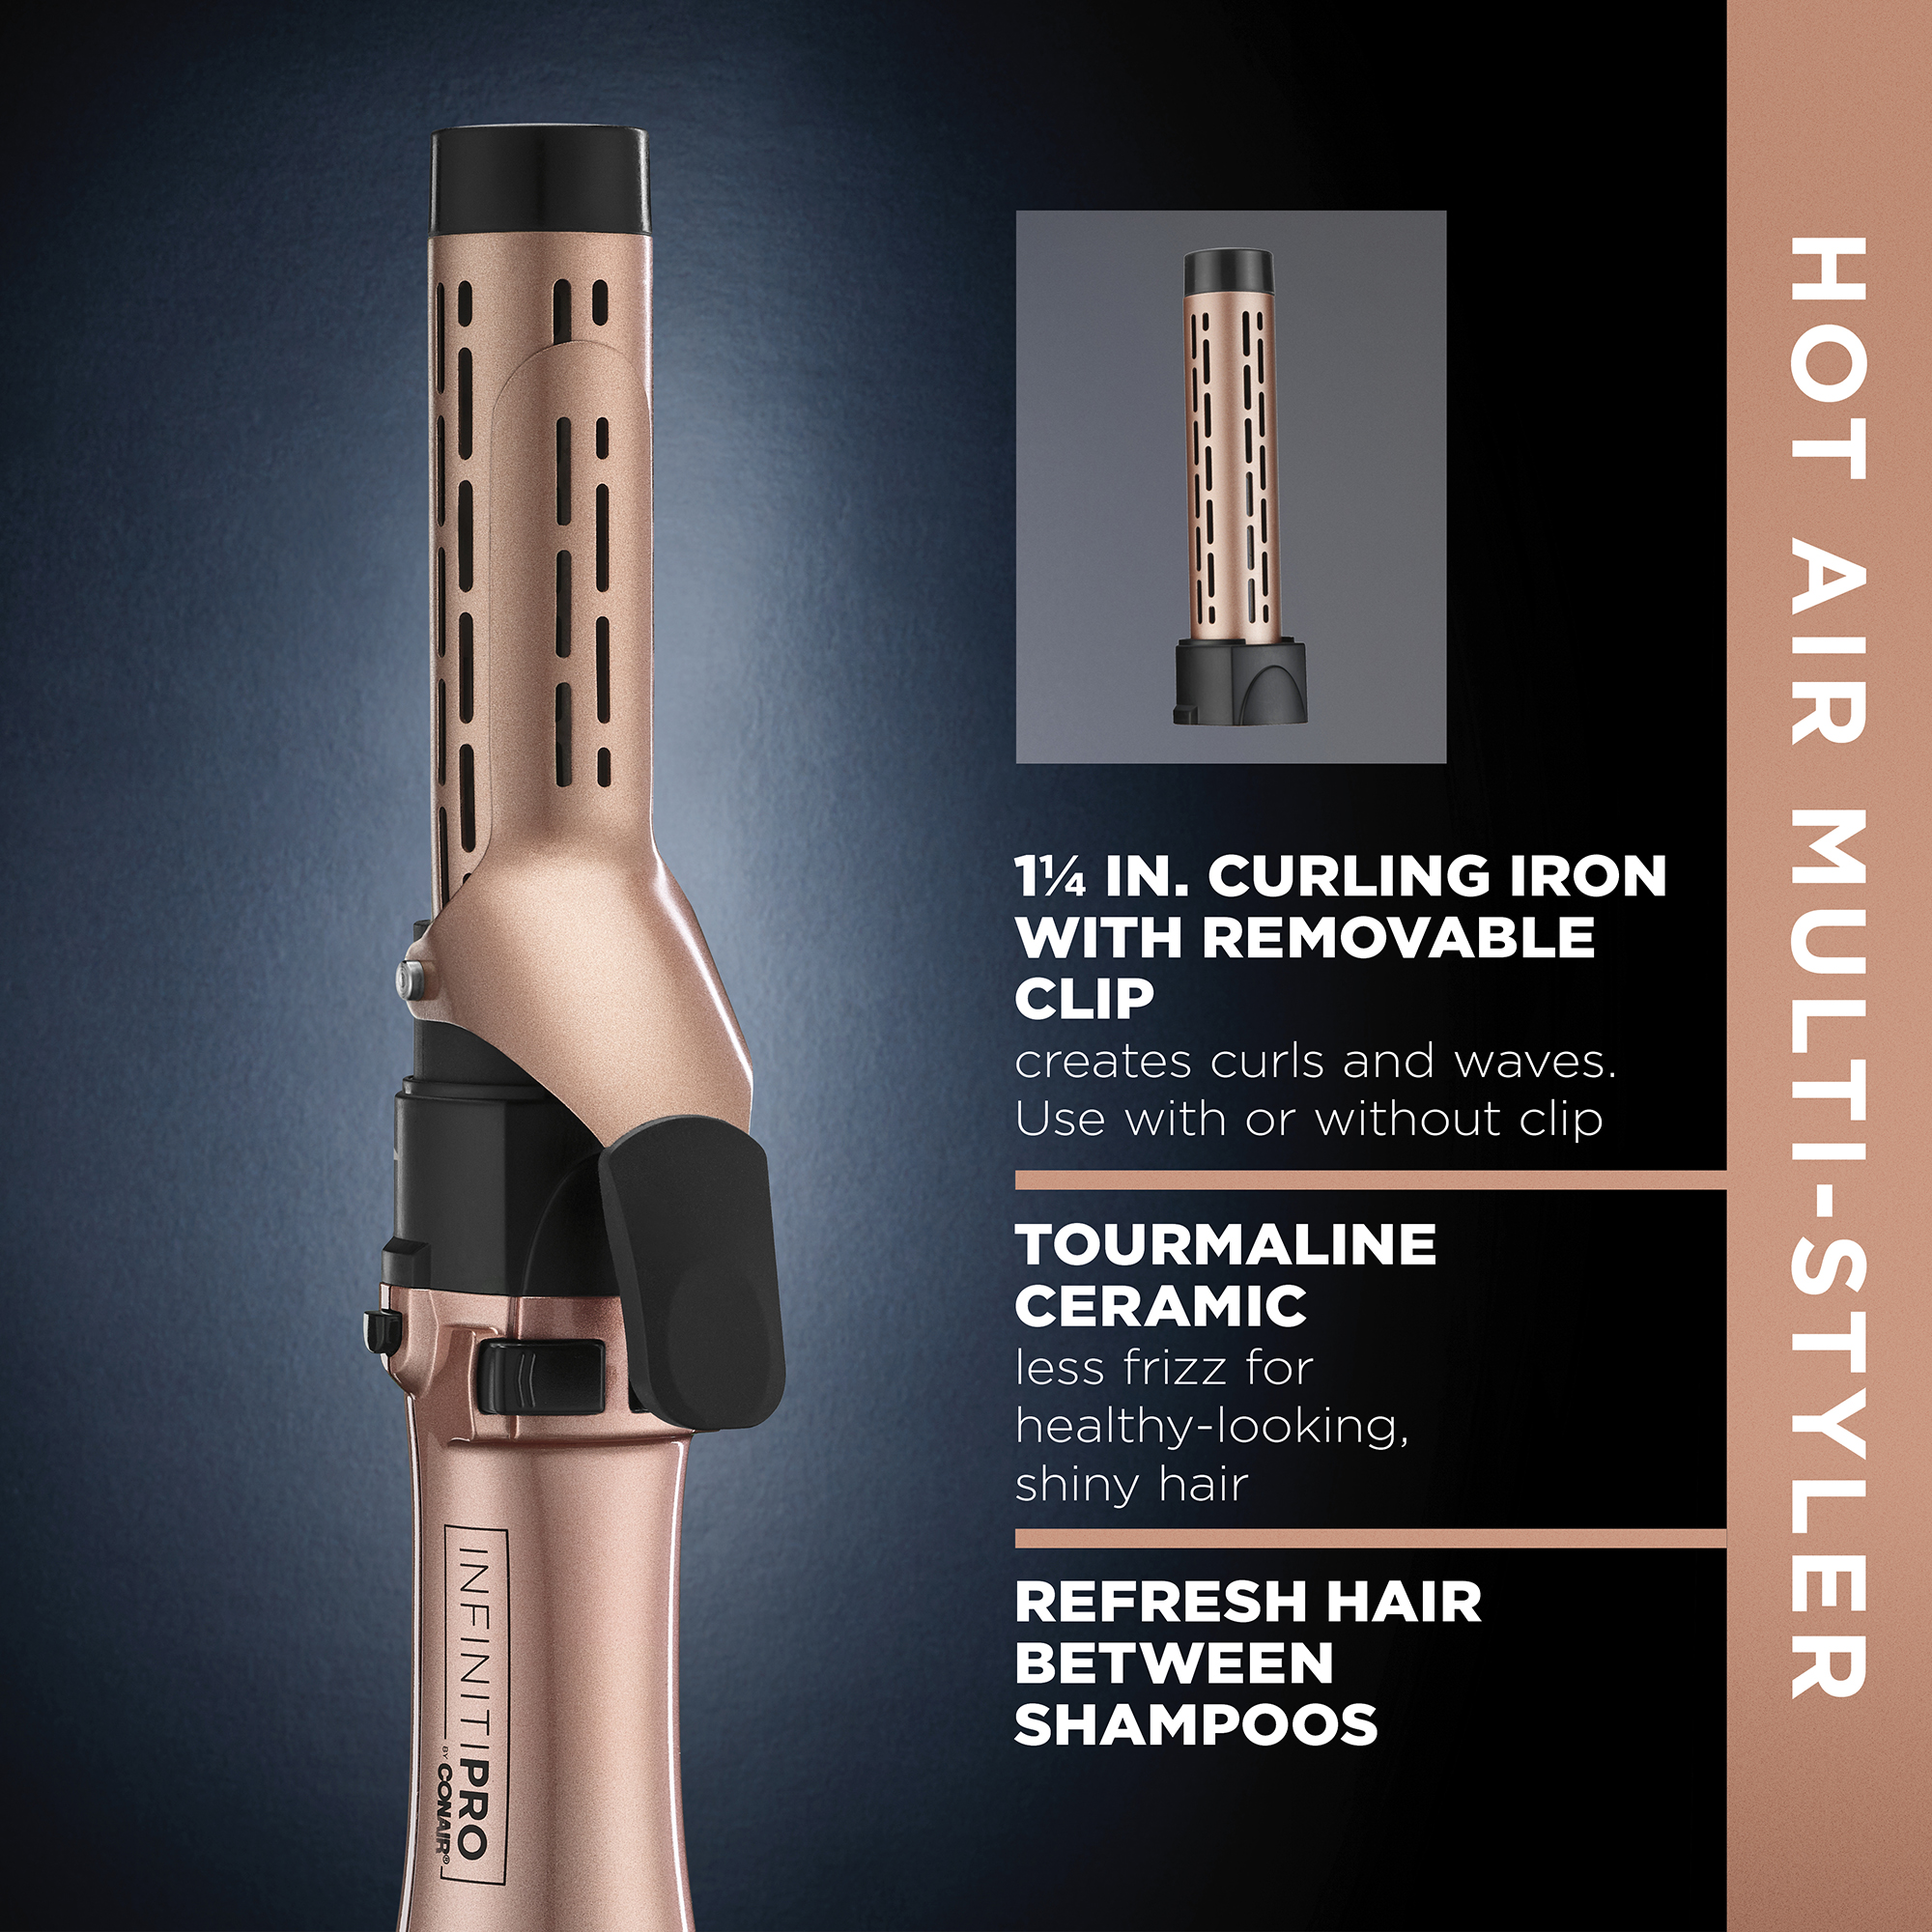 InfinitiPRO by Conair Hot Air Brush Multistyler BC193 - image 5 of 11